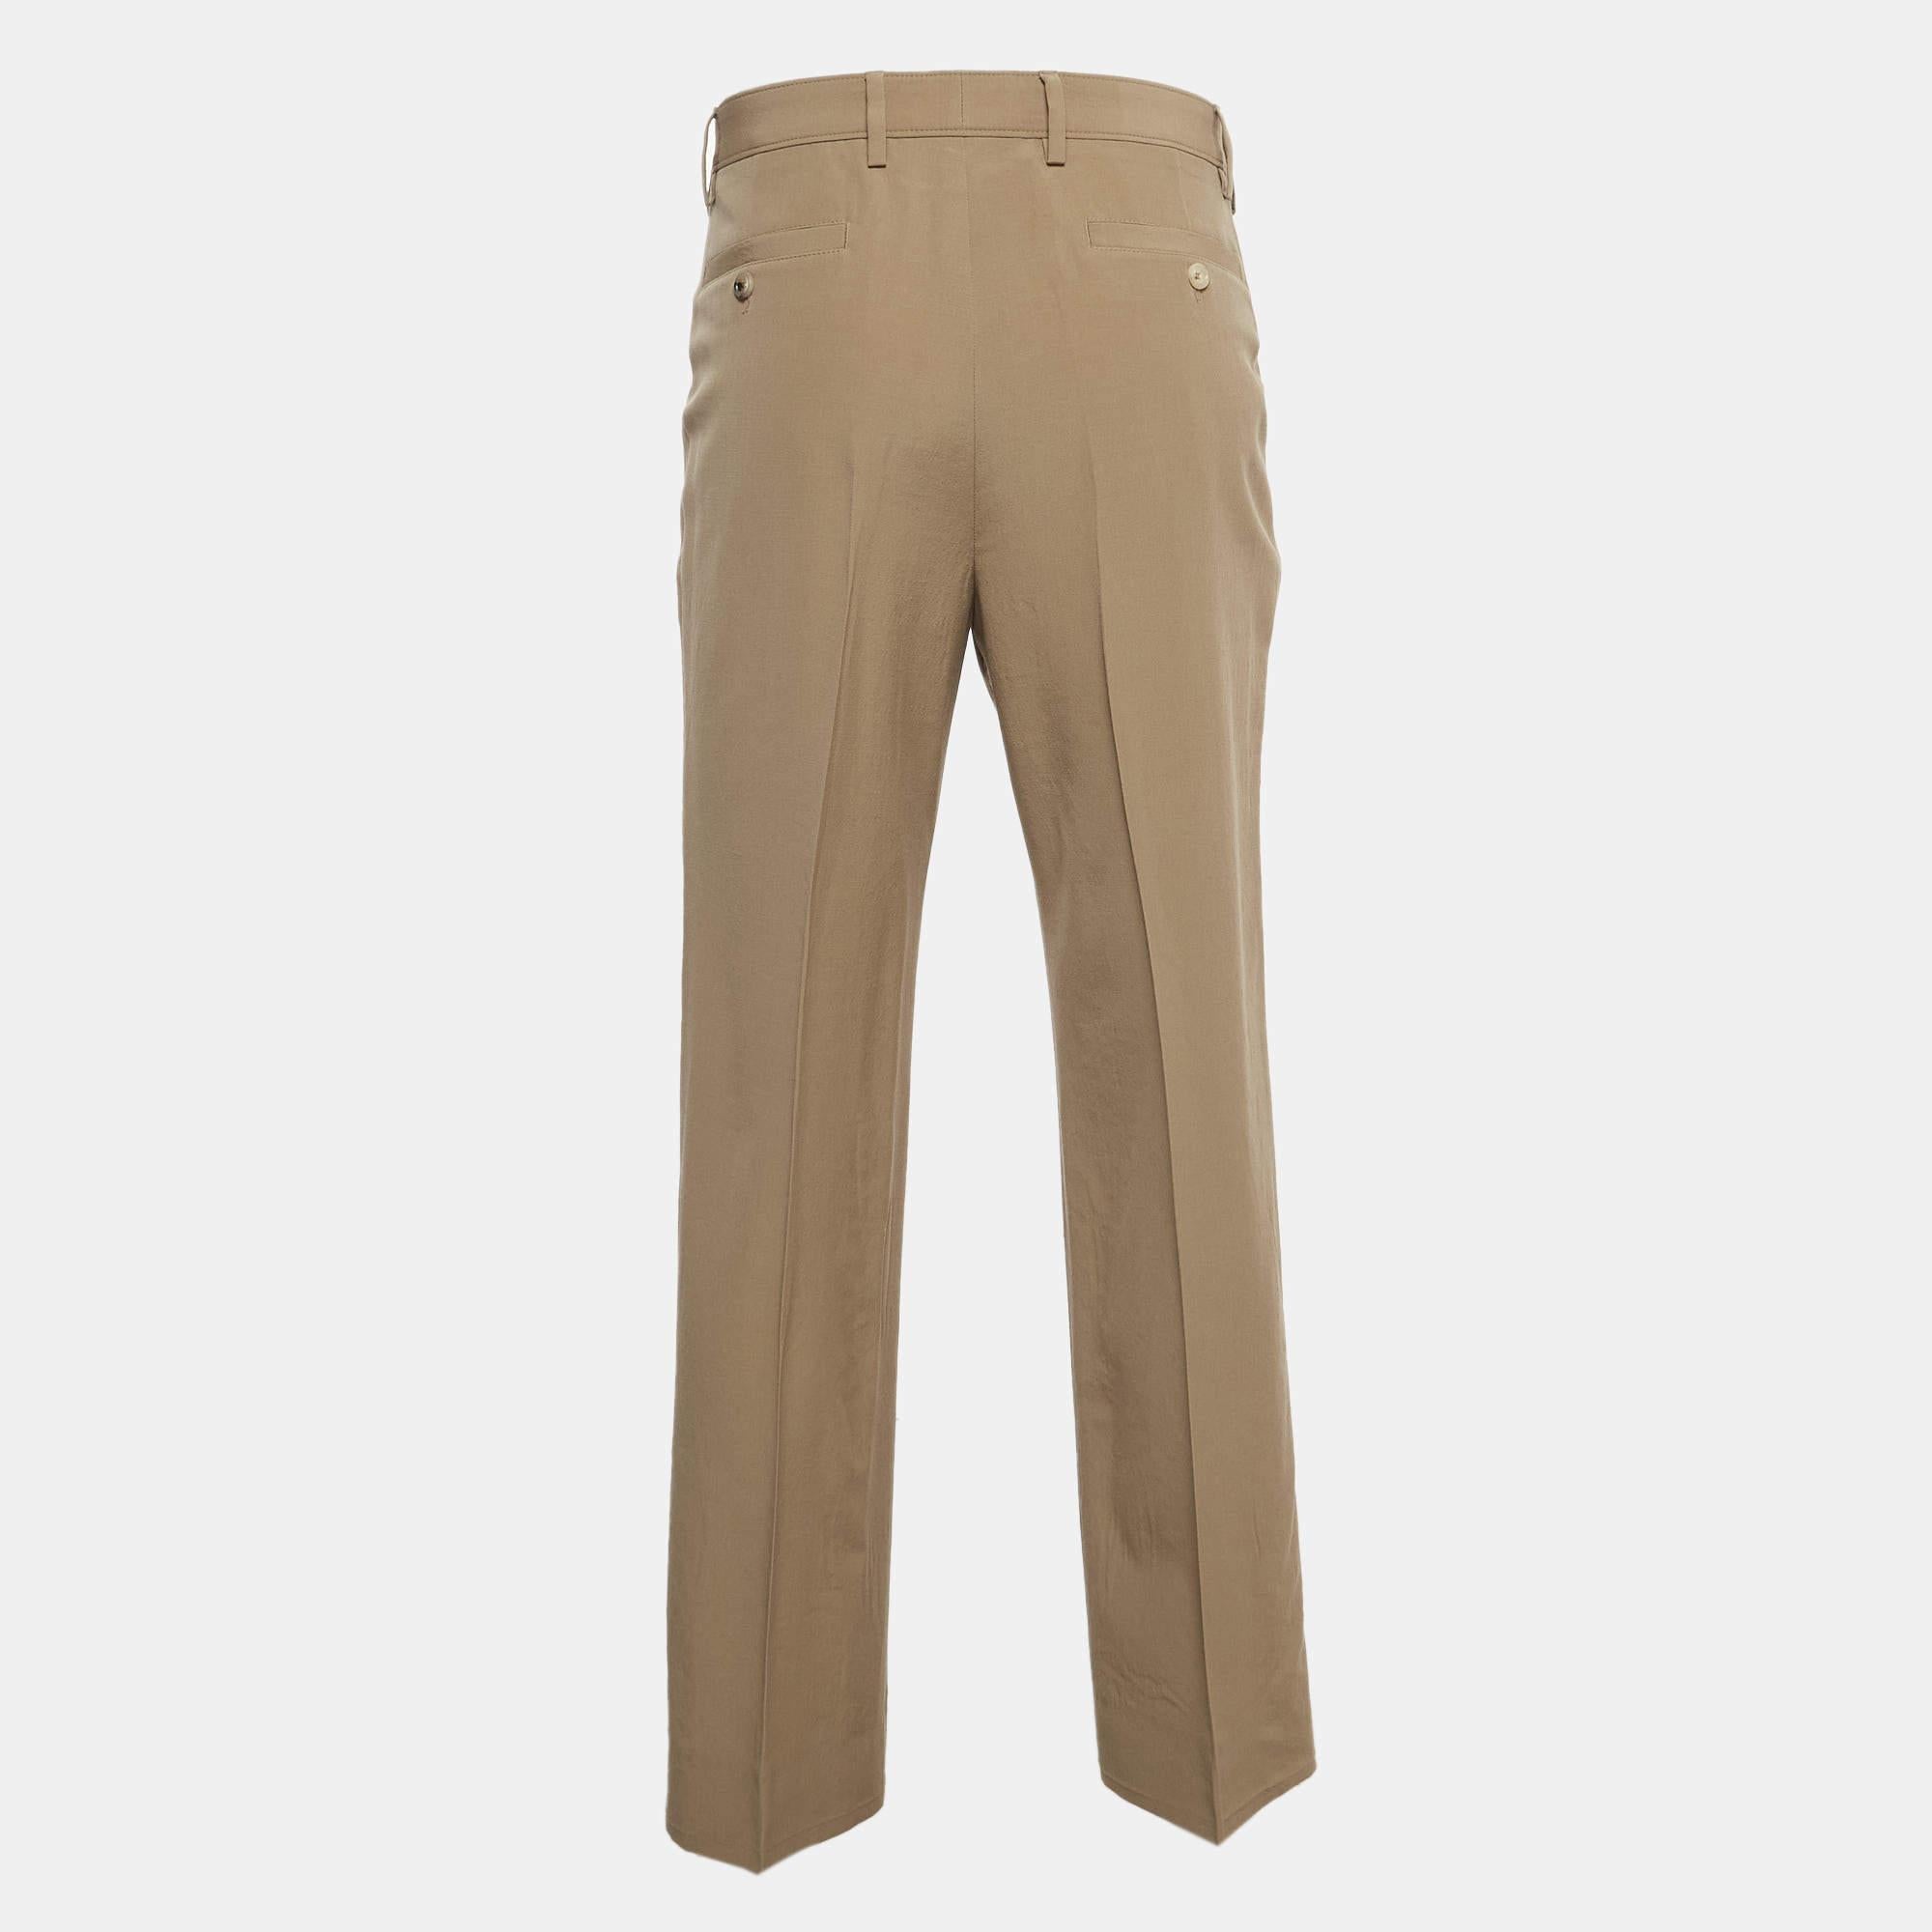 Enhance your formal attire with this pair of Gucci trousers. Designed into a superb silhouette and fit, this pair of trousers will definitely make you look elegant.

